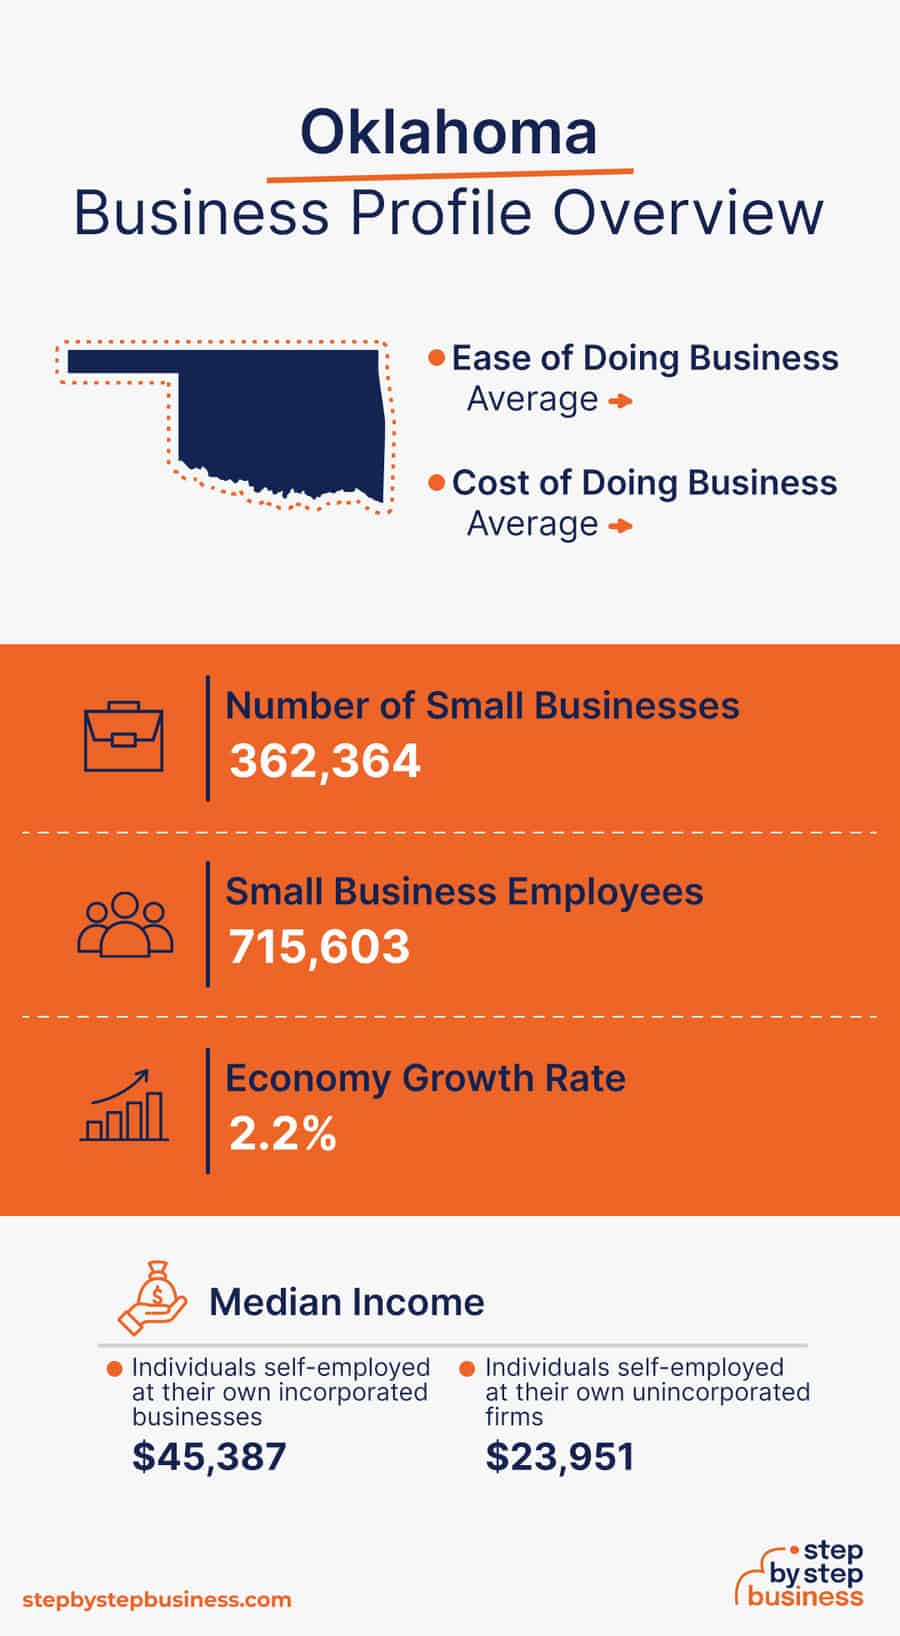 Oklahoma Business Profile Overview